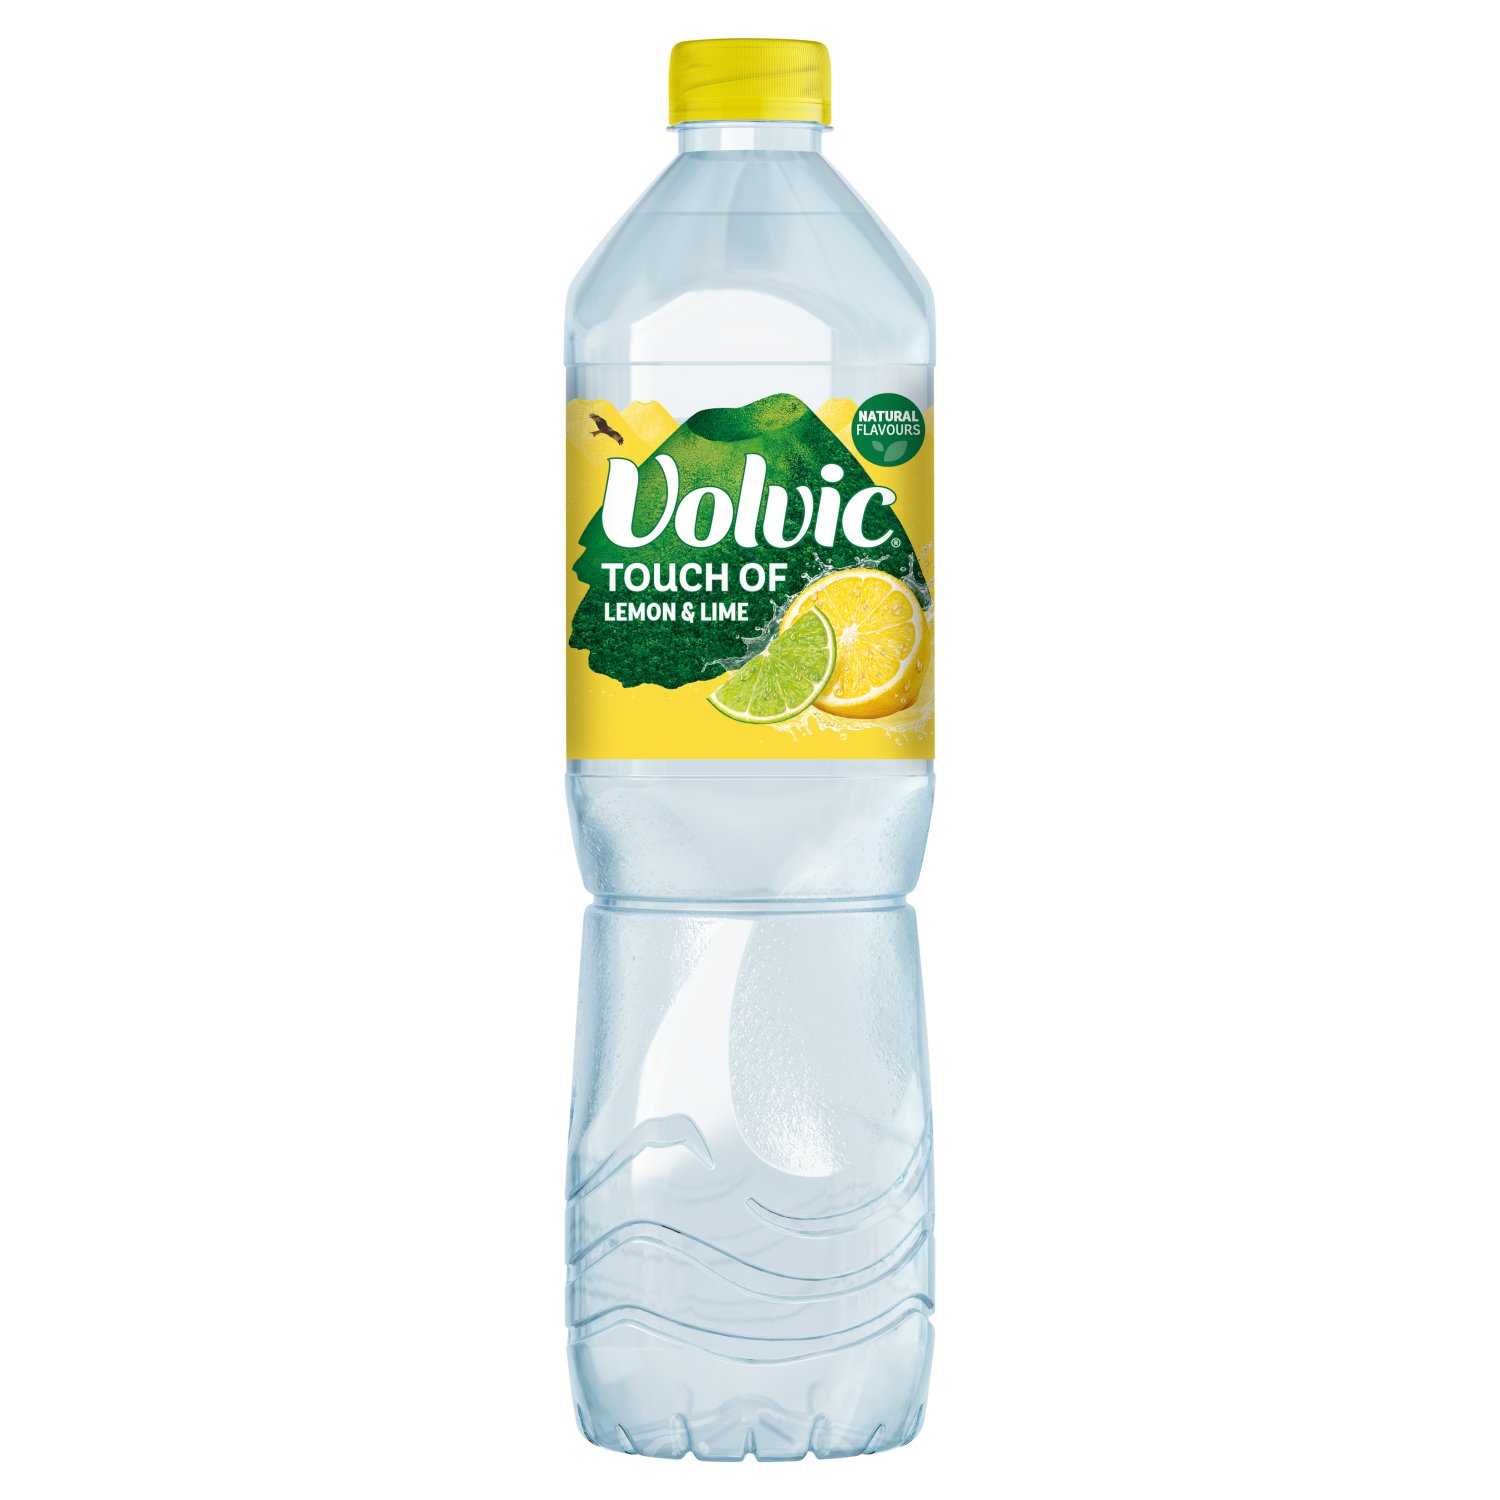 Volvic Touch Of Fruit Lemon & Lime Flavour Water (1.5 L)